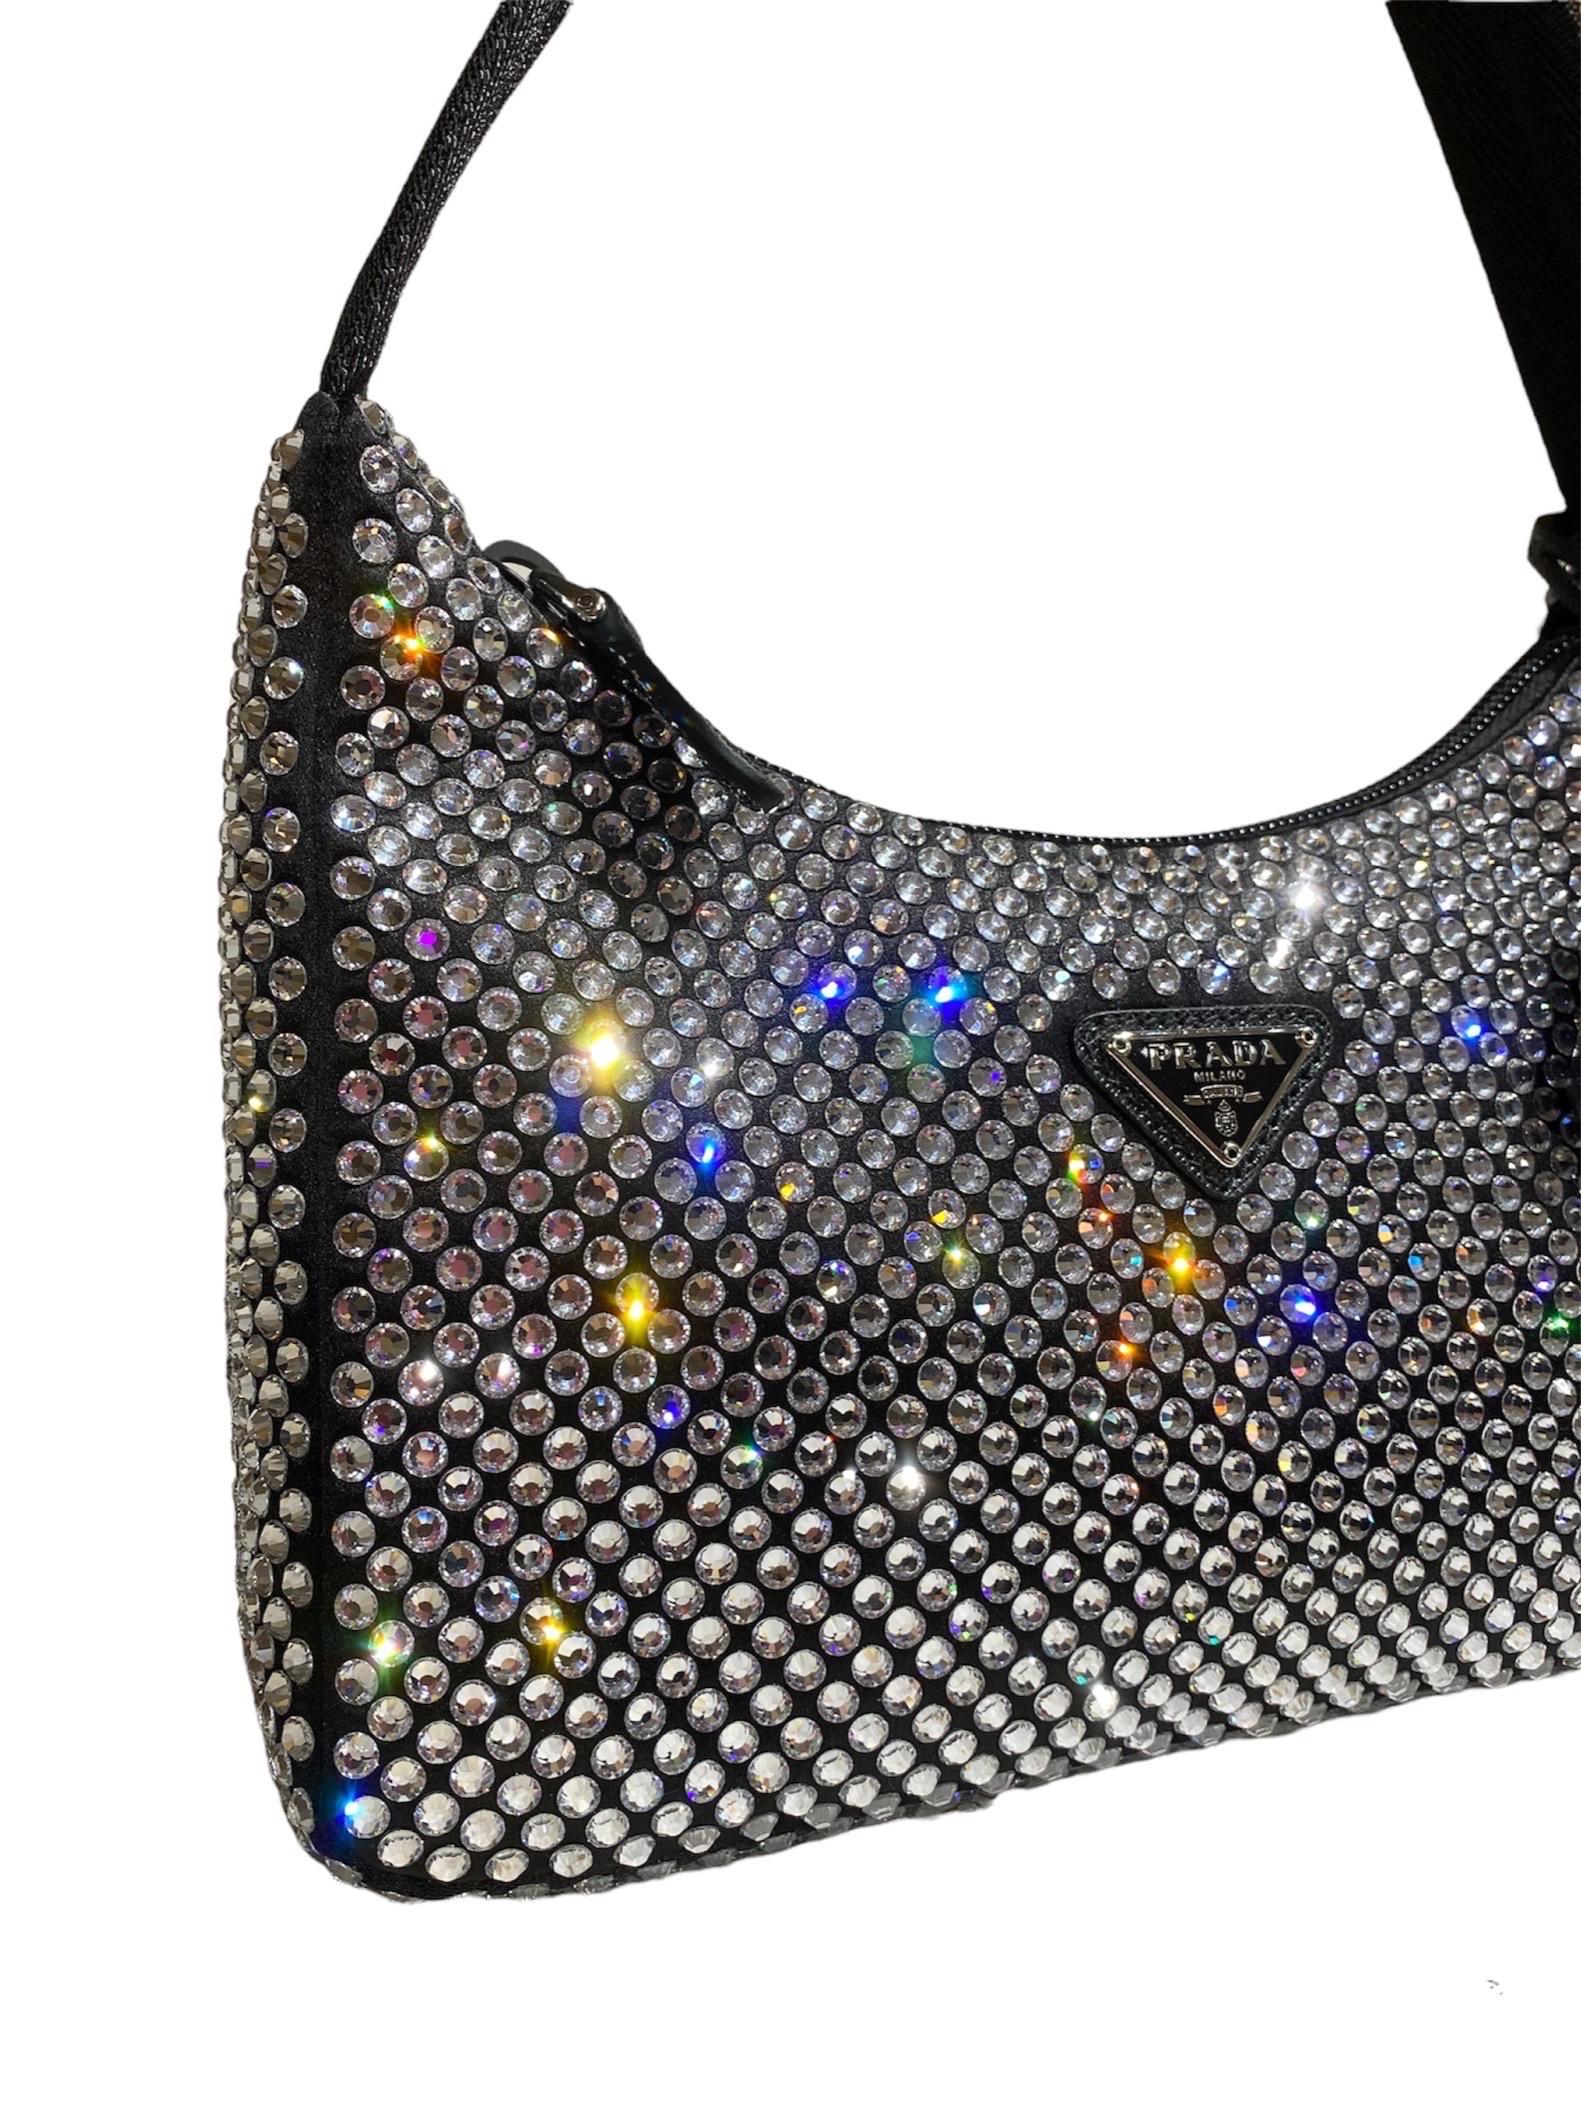 Bag, signed Prada, re-edition 2000 model, made of black fabric covered with multicolor rhinestones, with silver hardware. Equipped with a zip closure, internally lined in black satin, roomy for the essentials.

Equipped with a fabric handle, 2 cm